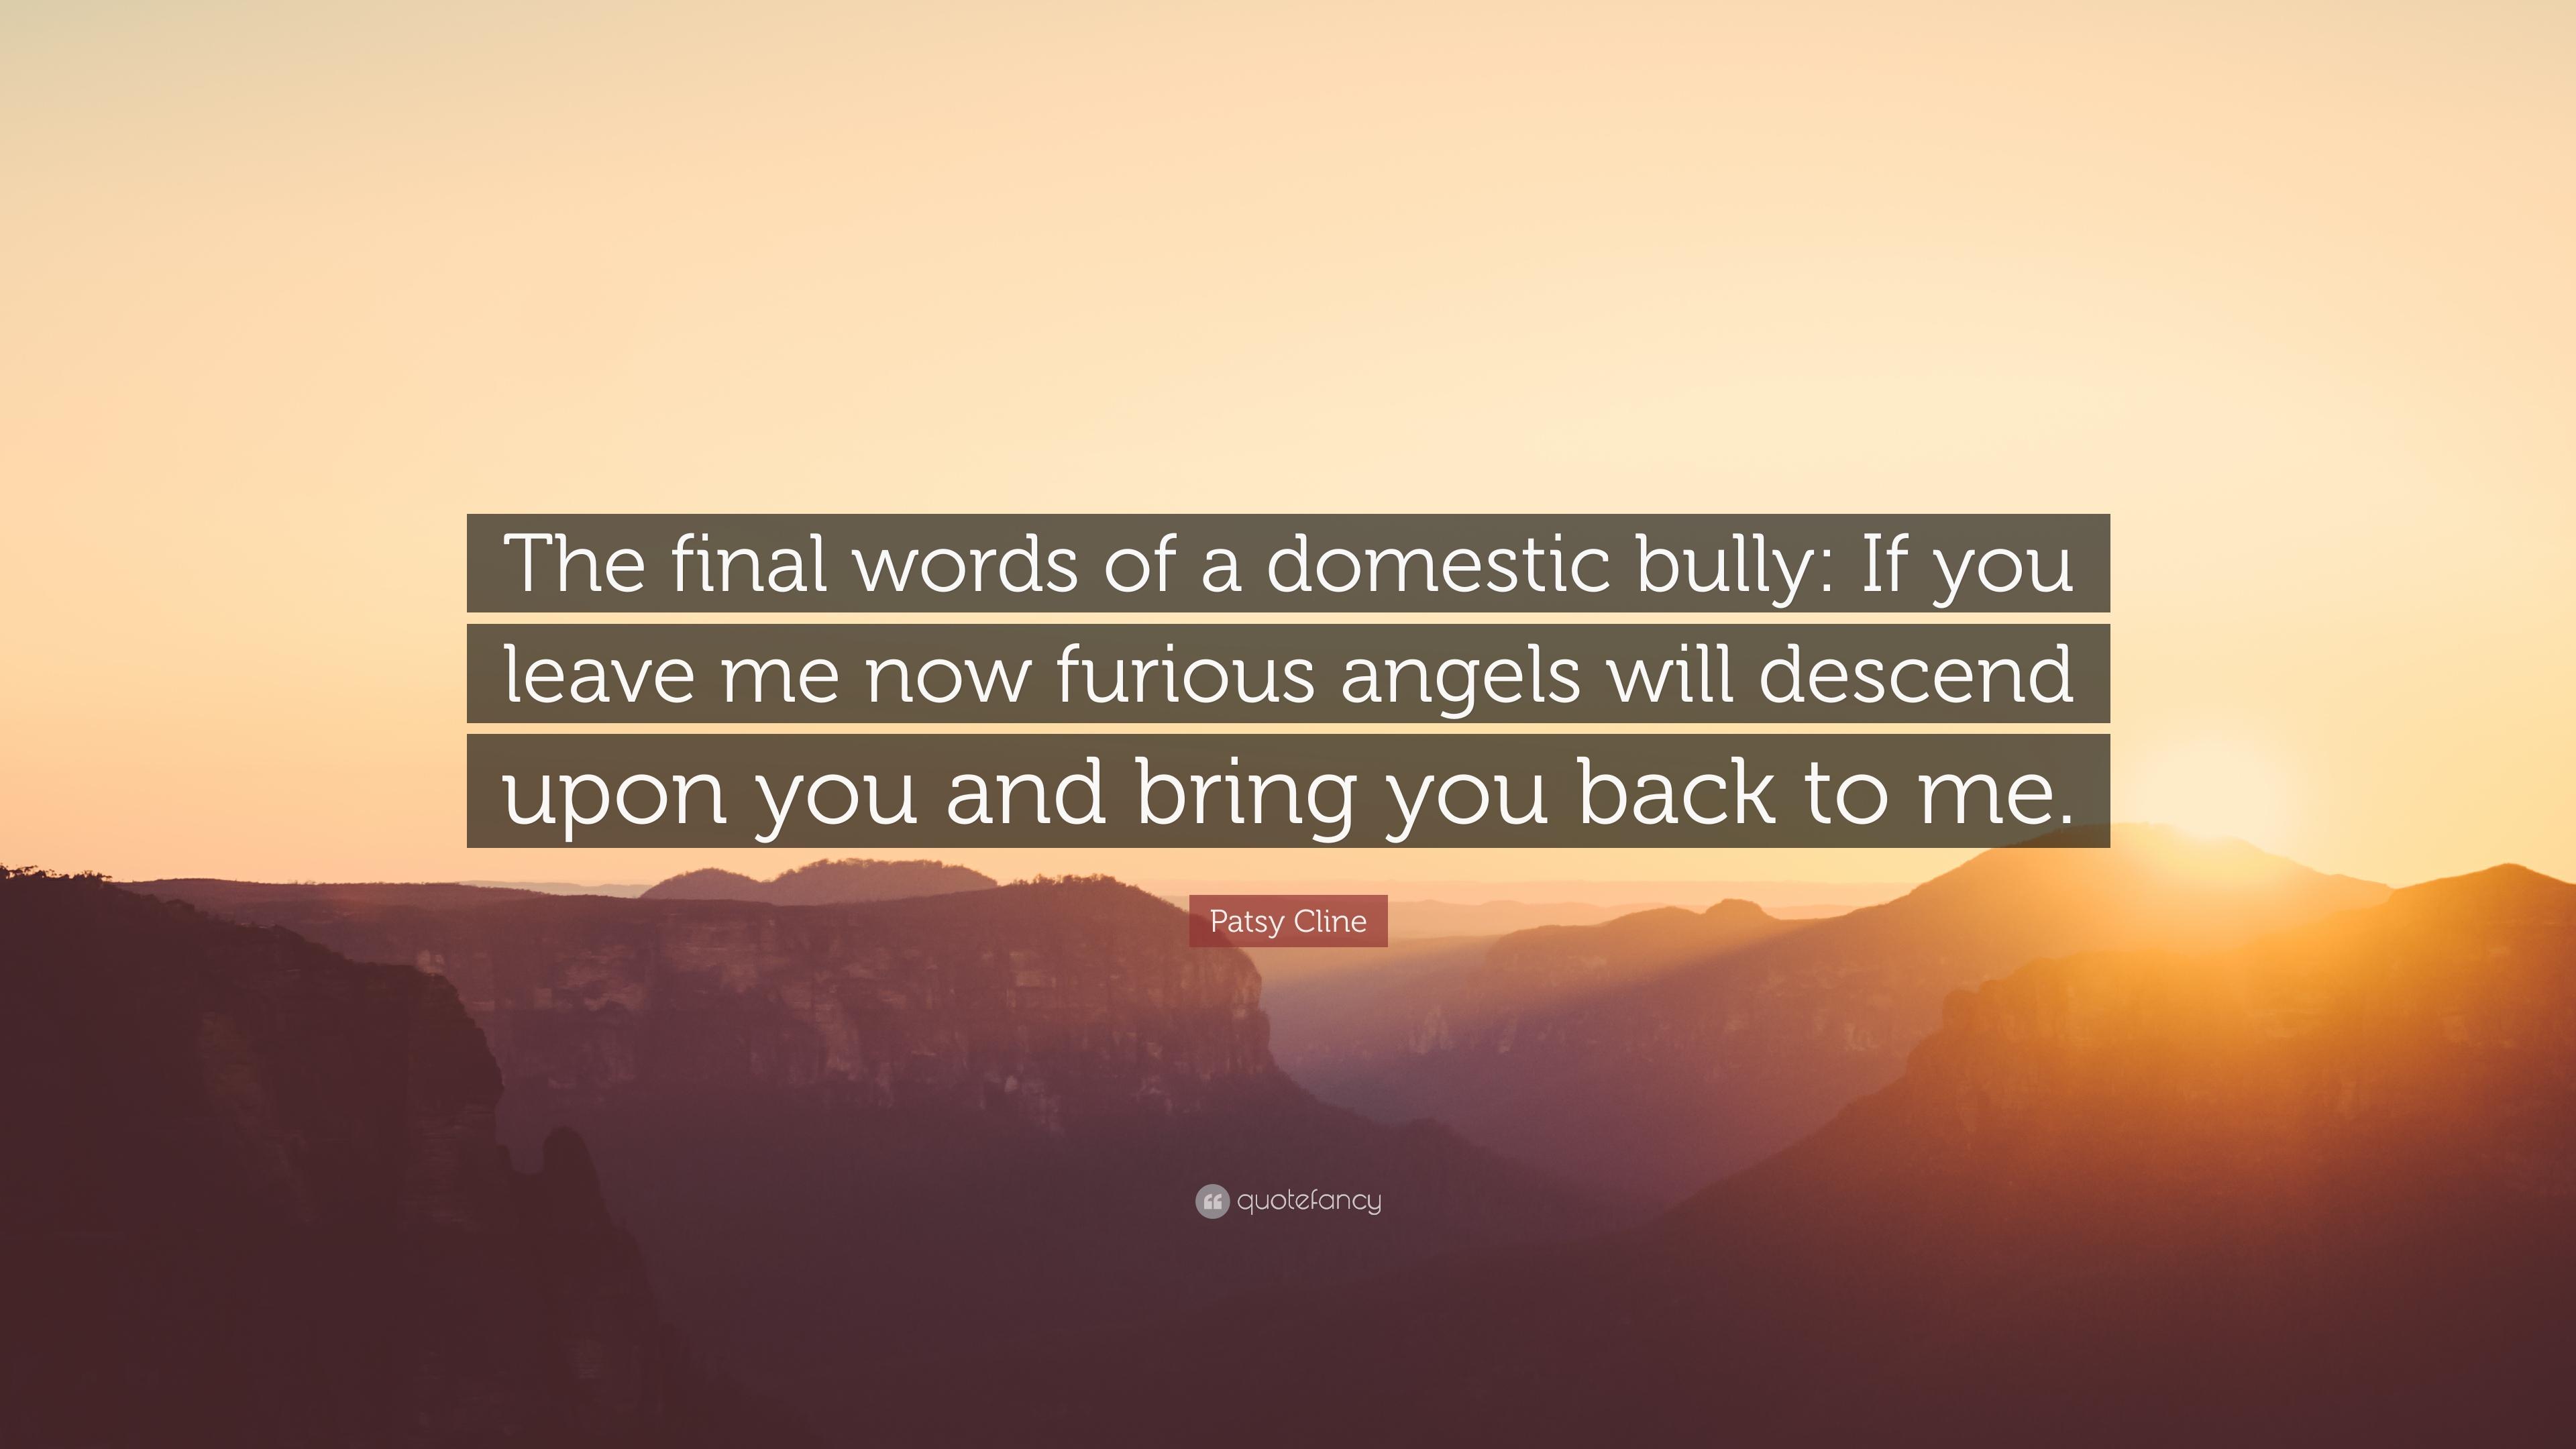 Patsy Cline Quote: “The final words of a domestic bully: If you